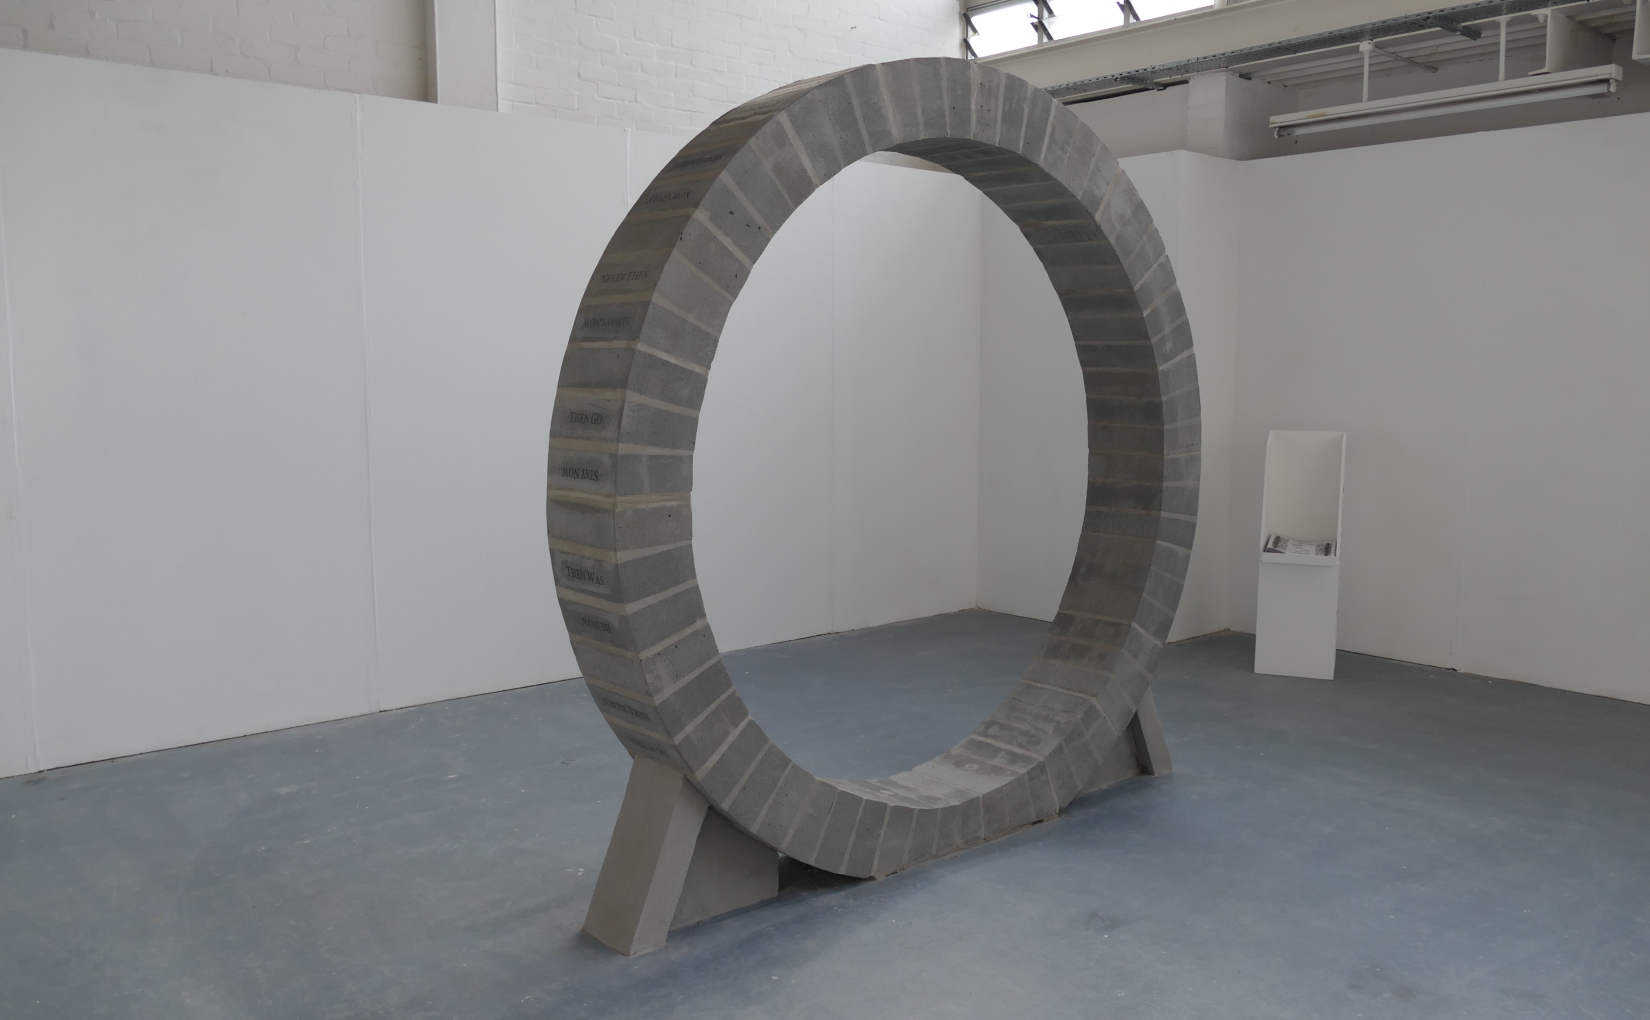 Creating the Stargate – THE ARTFUL DONDER